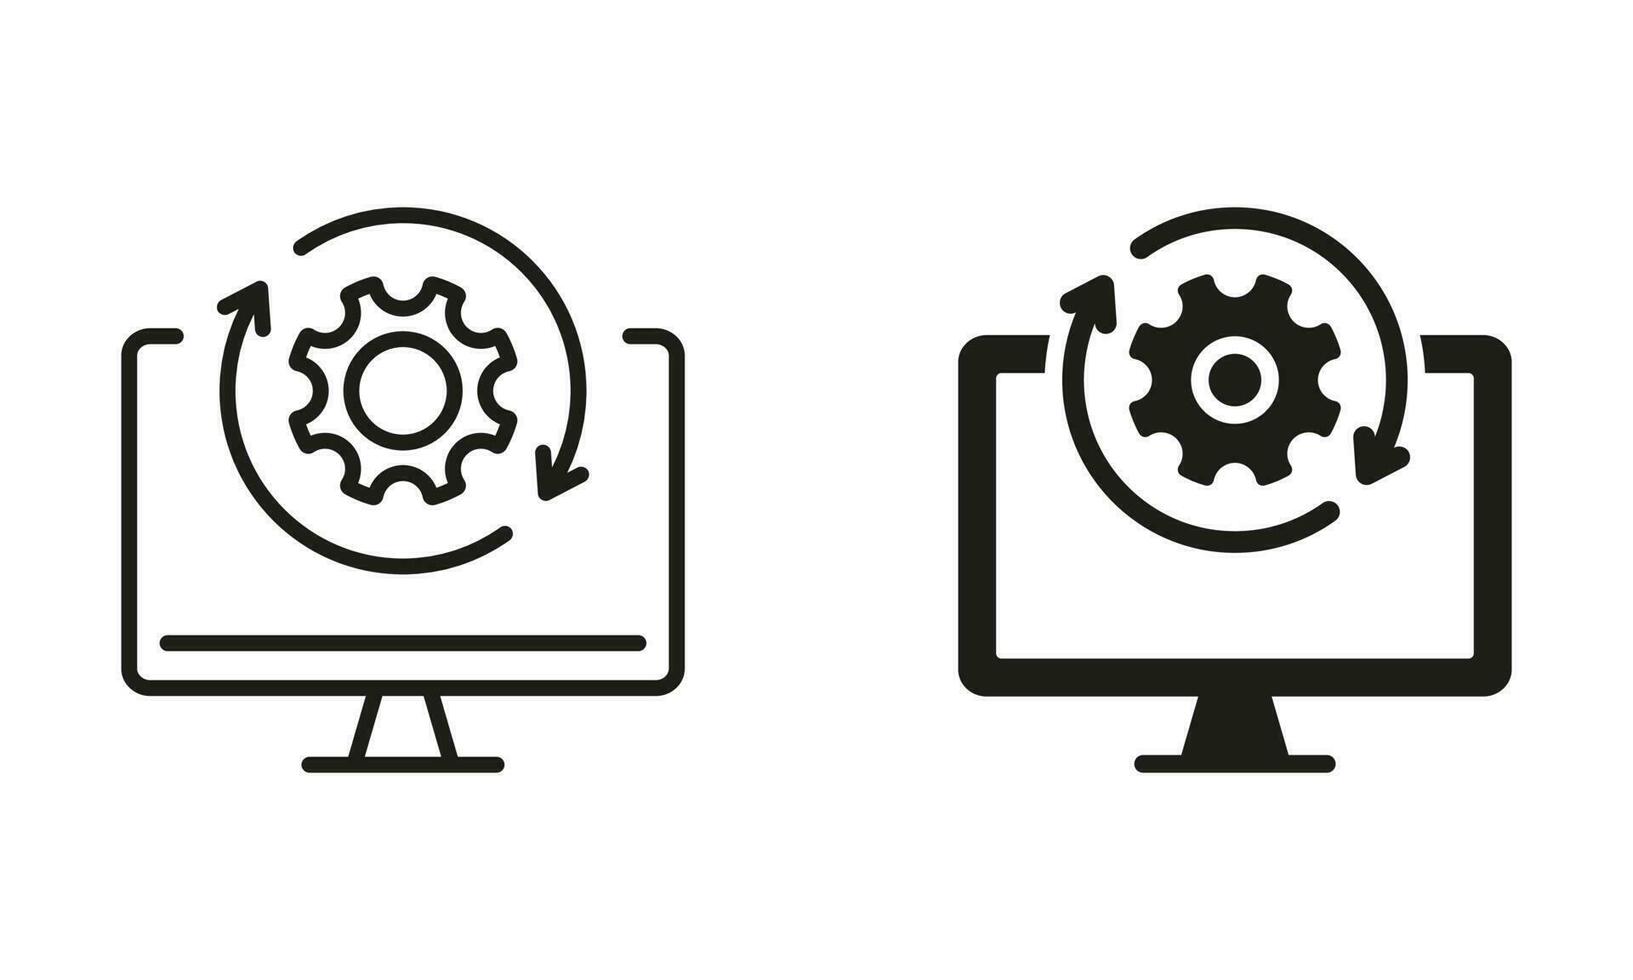 Upgrade of Software Line and Silhouette Icon Set. Computer System Update Pictogram. Download Process Sign. Upgrade Progress Symbol Collection. Vector Isolated Illustration.